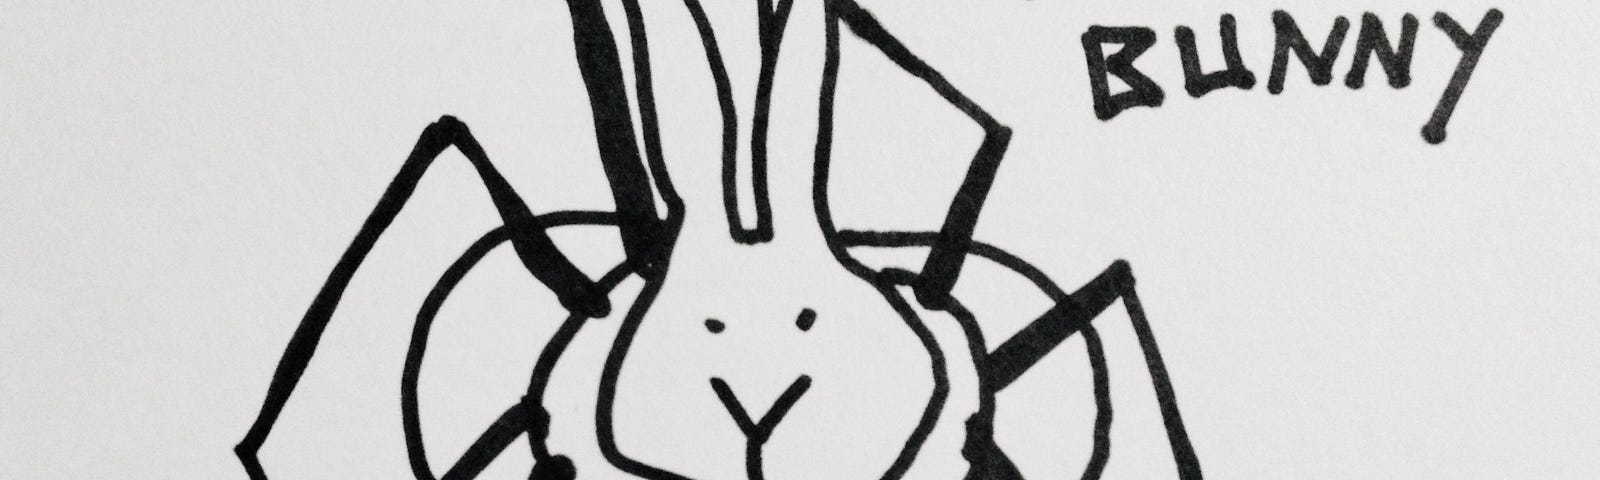 A a simple line drawing cartoon of a spider with a rabbit’s head. The words Spider Bunny are in the upper right corner. Art by Doodleslice 2014